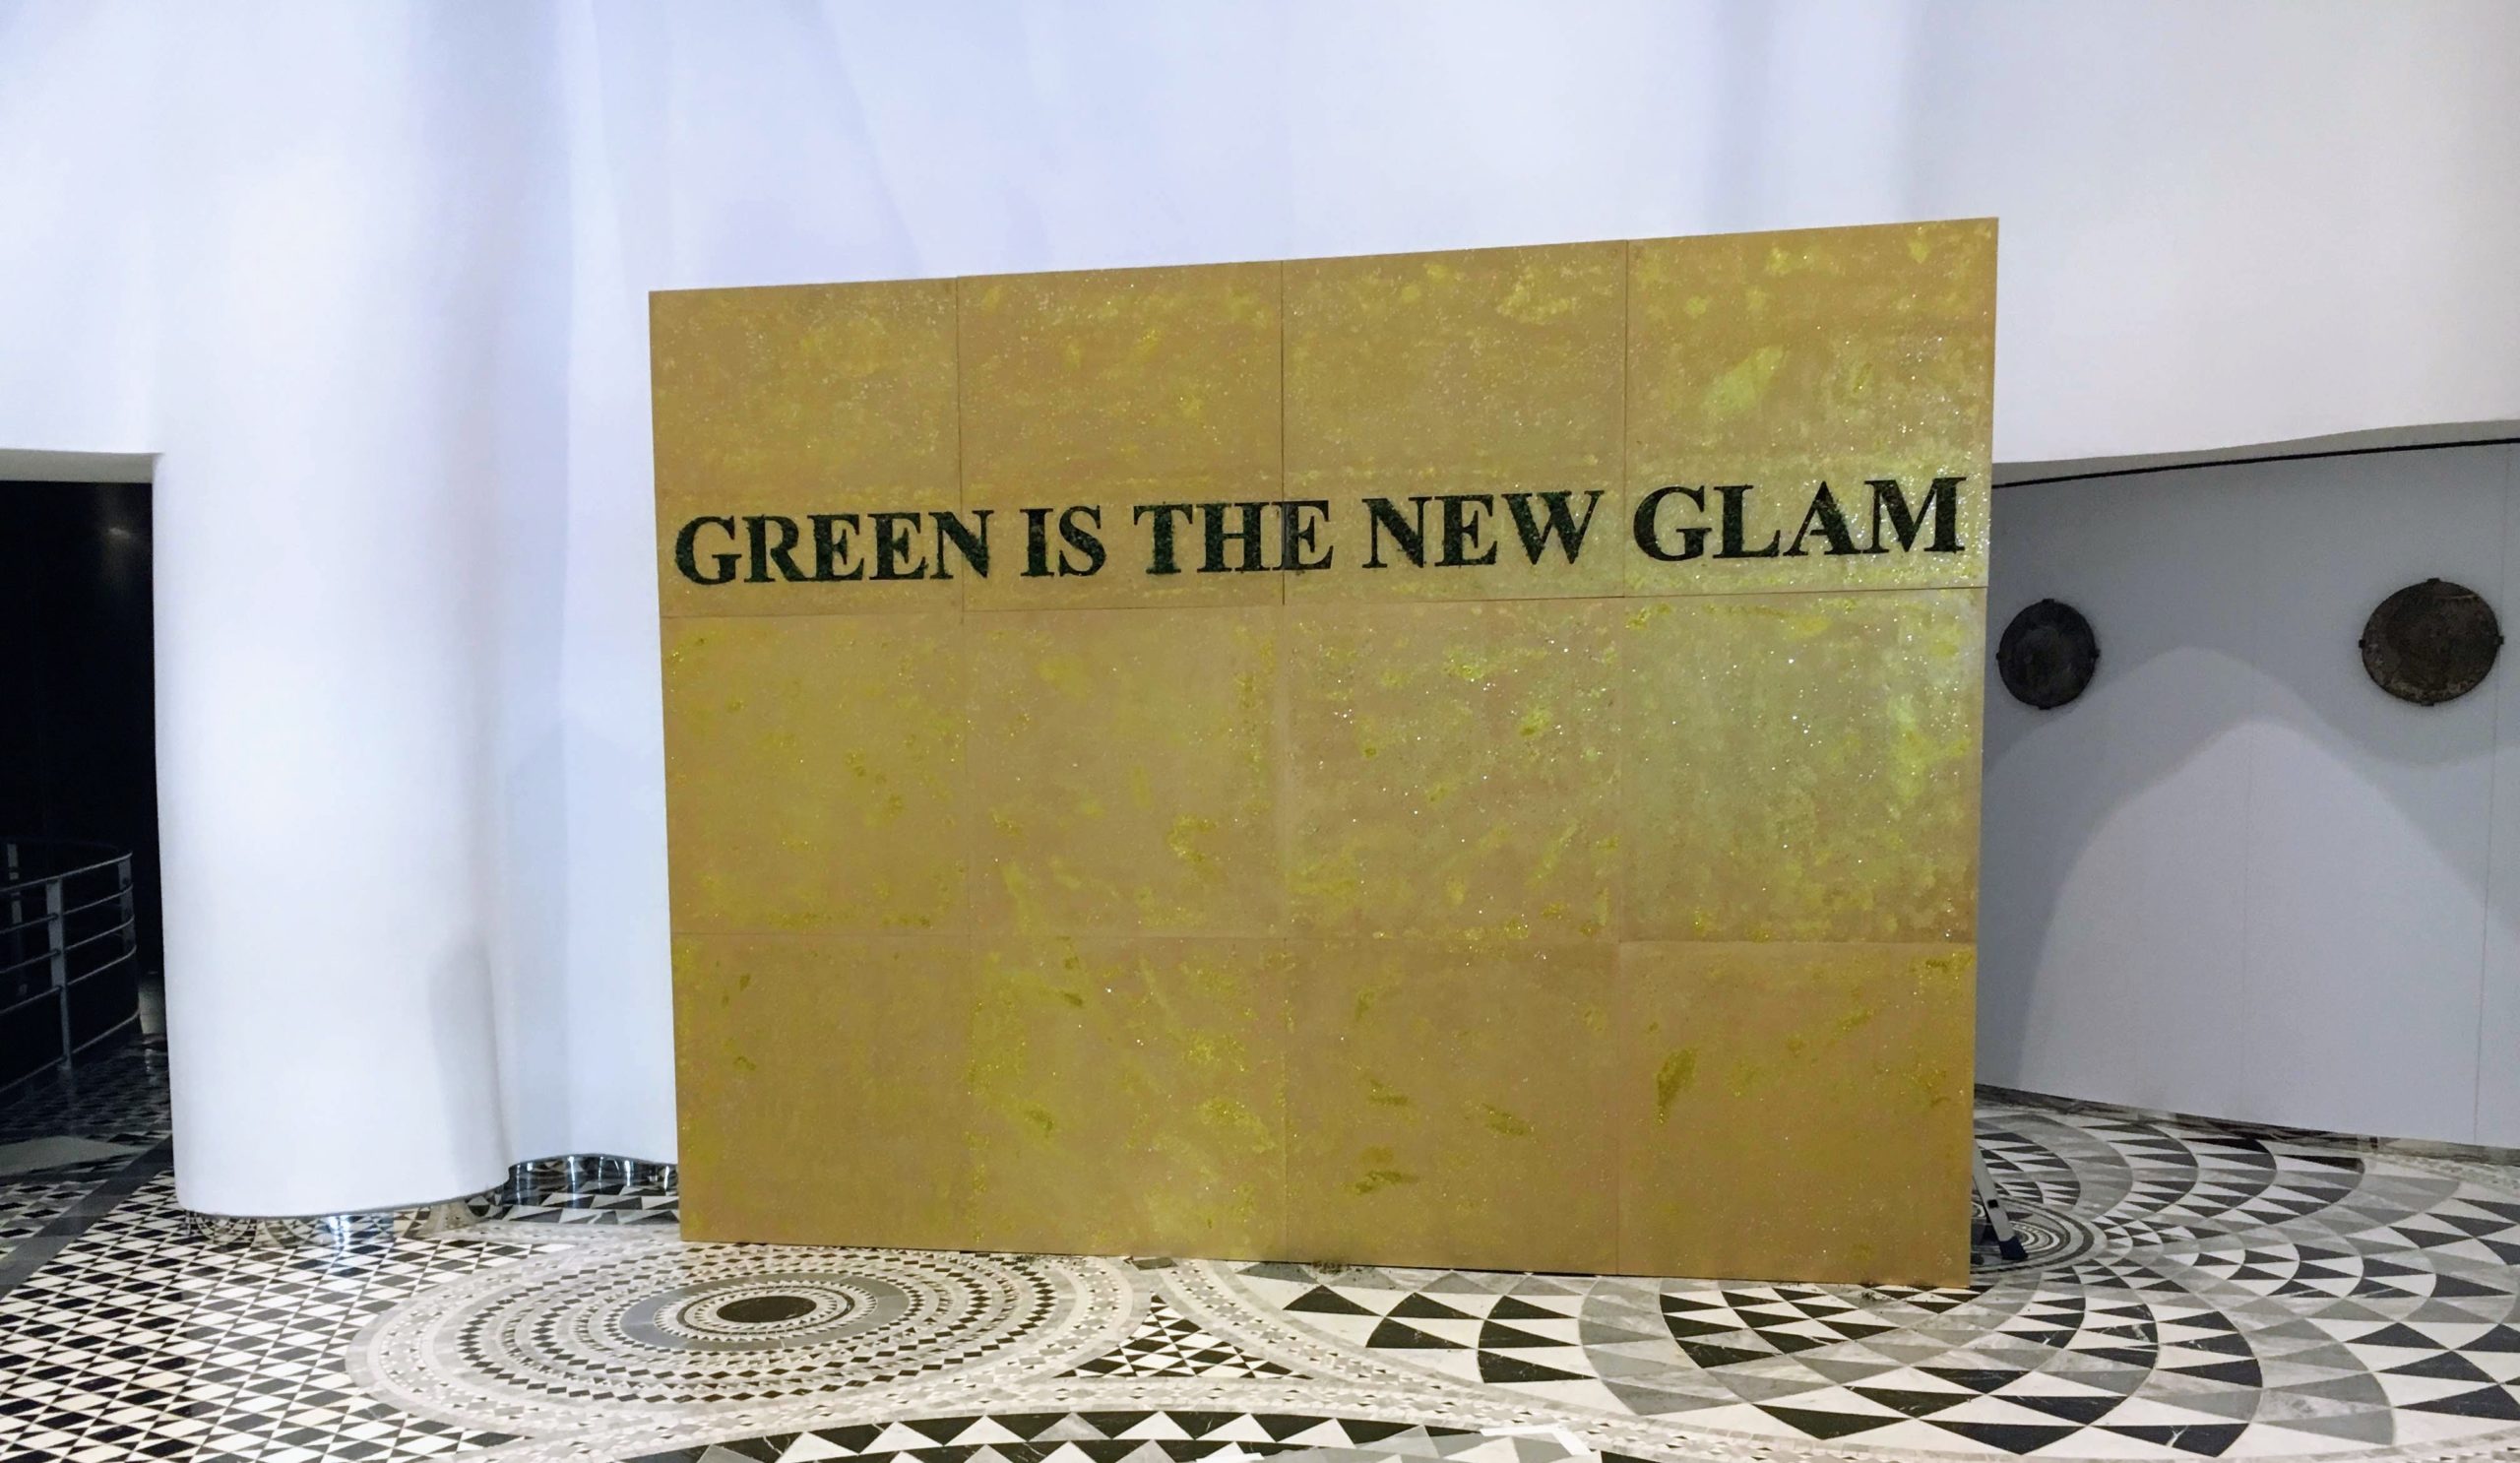 Green is the new glam